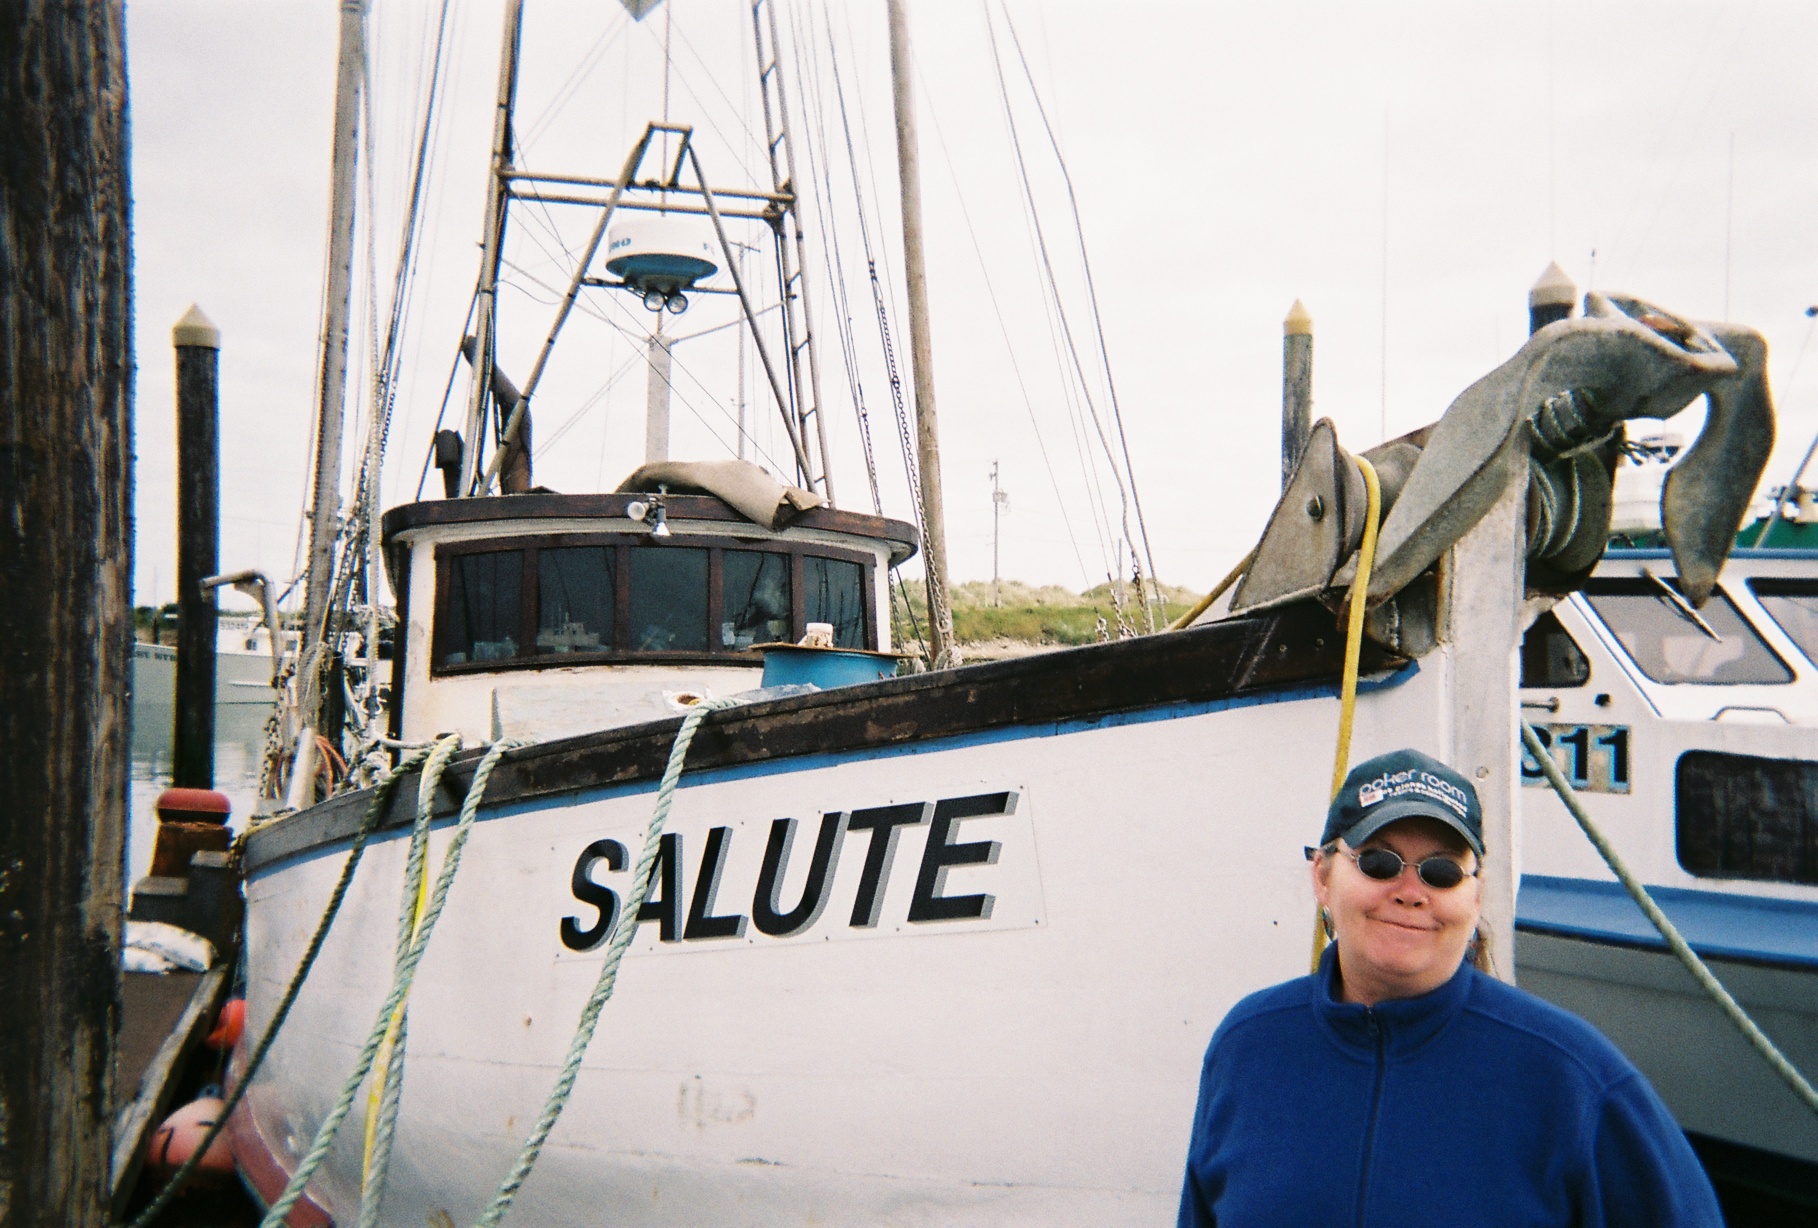 The actual Salute. Anastacia Moore spent time tuna fishing on this old wooden schooner that now sits derelict on the docks at Charleston Harbor